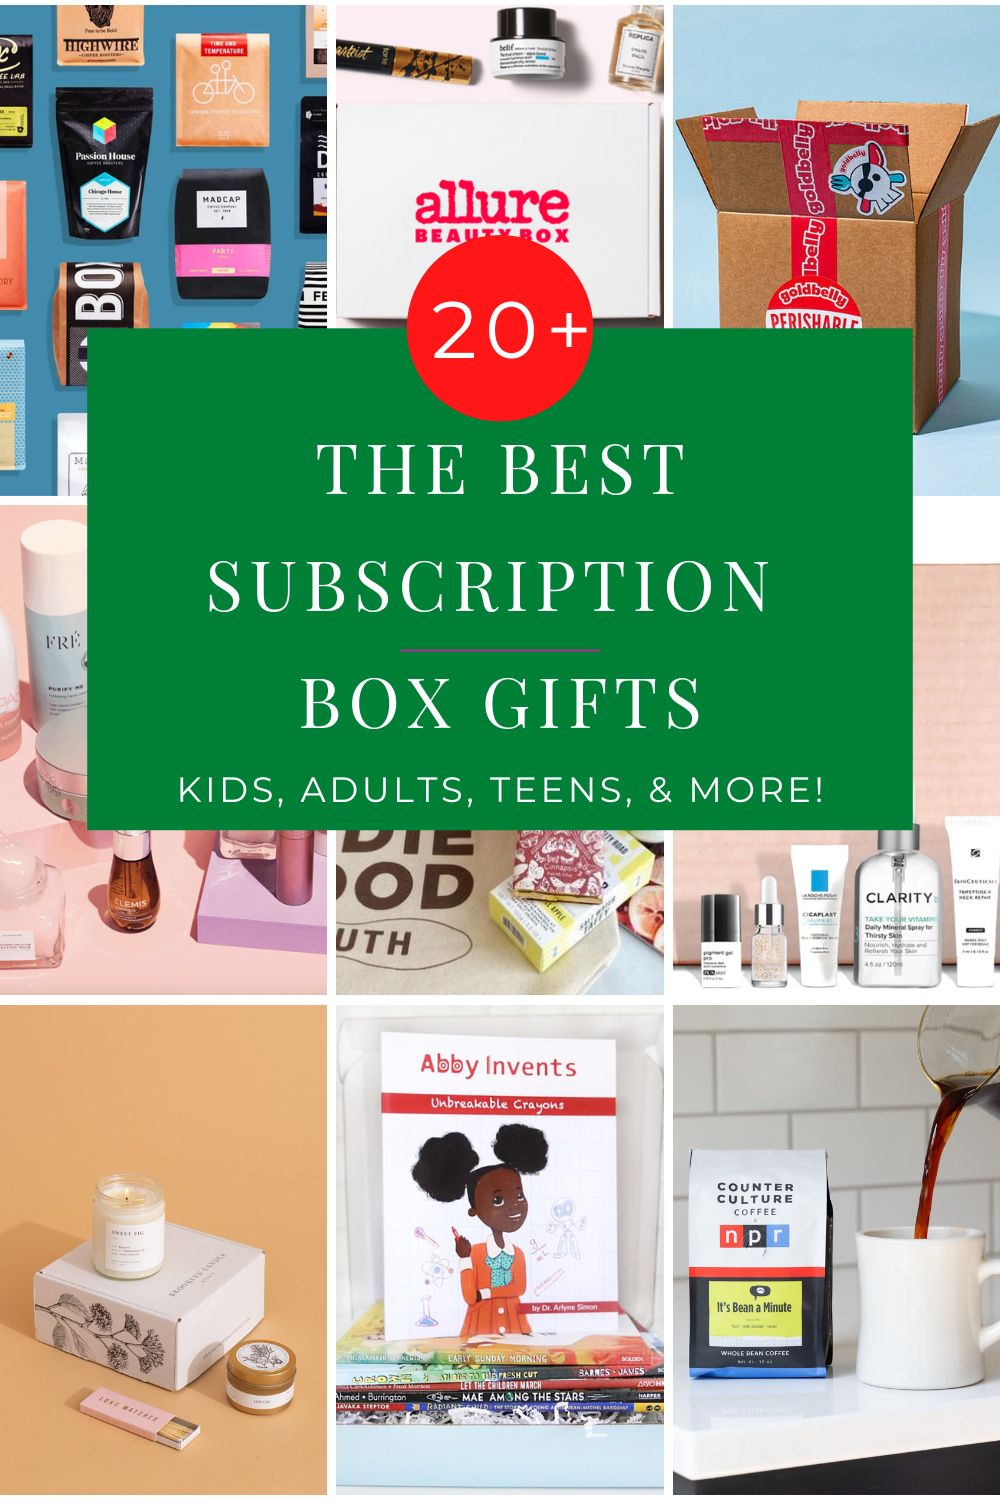 The Best Subscription Box Gifts: Over 20 Ideas for Everyone On Your List